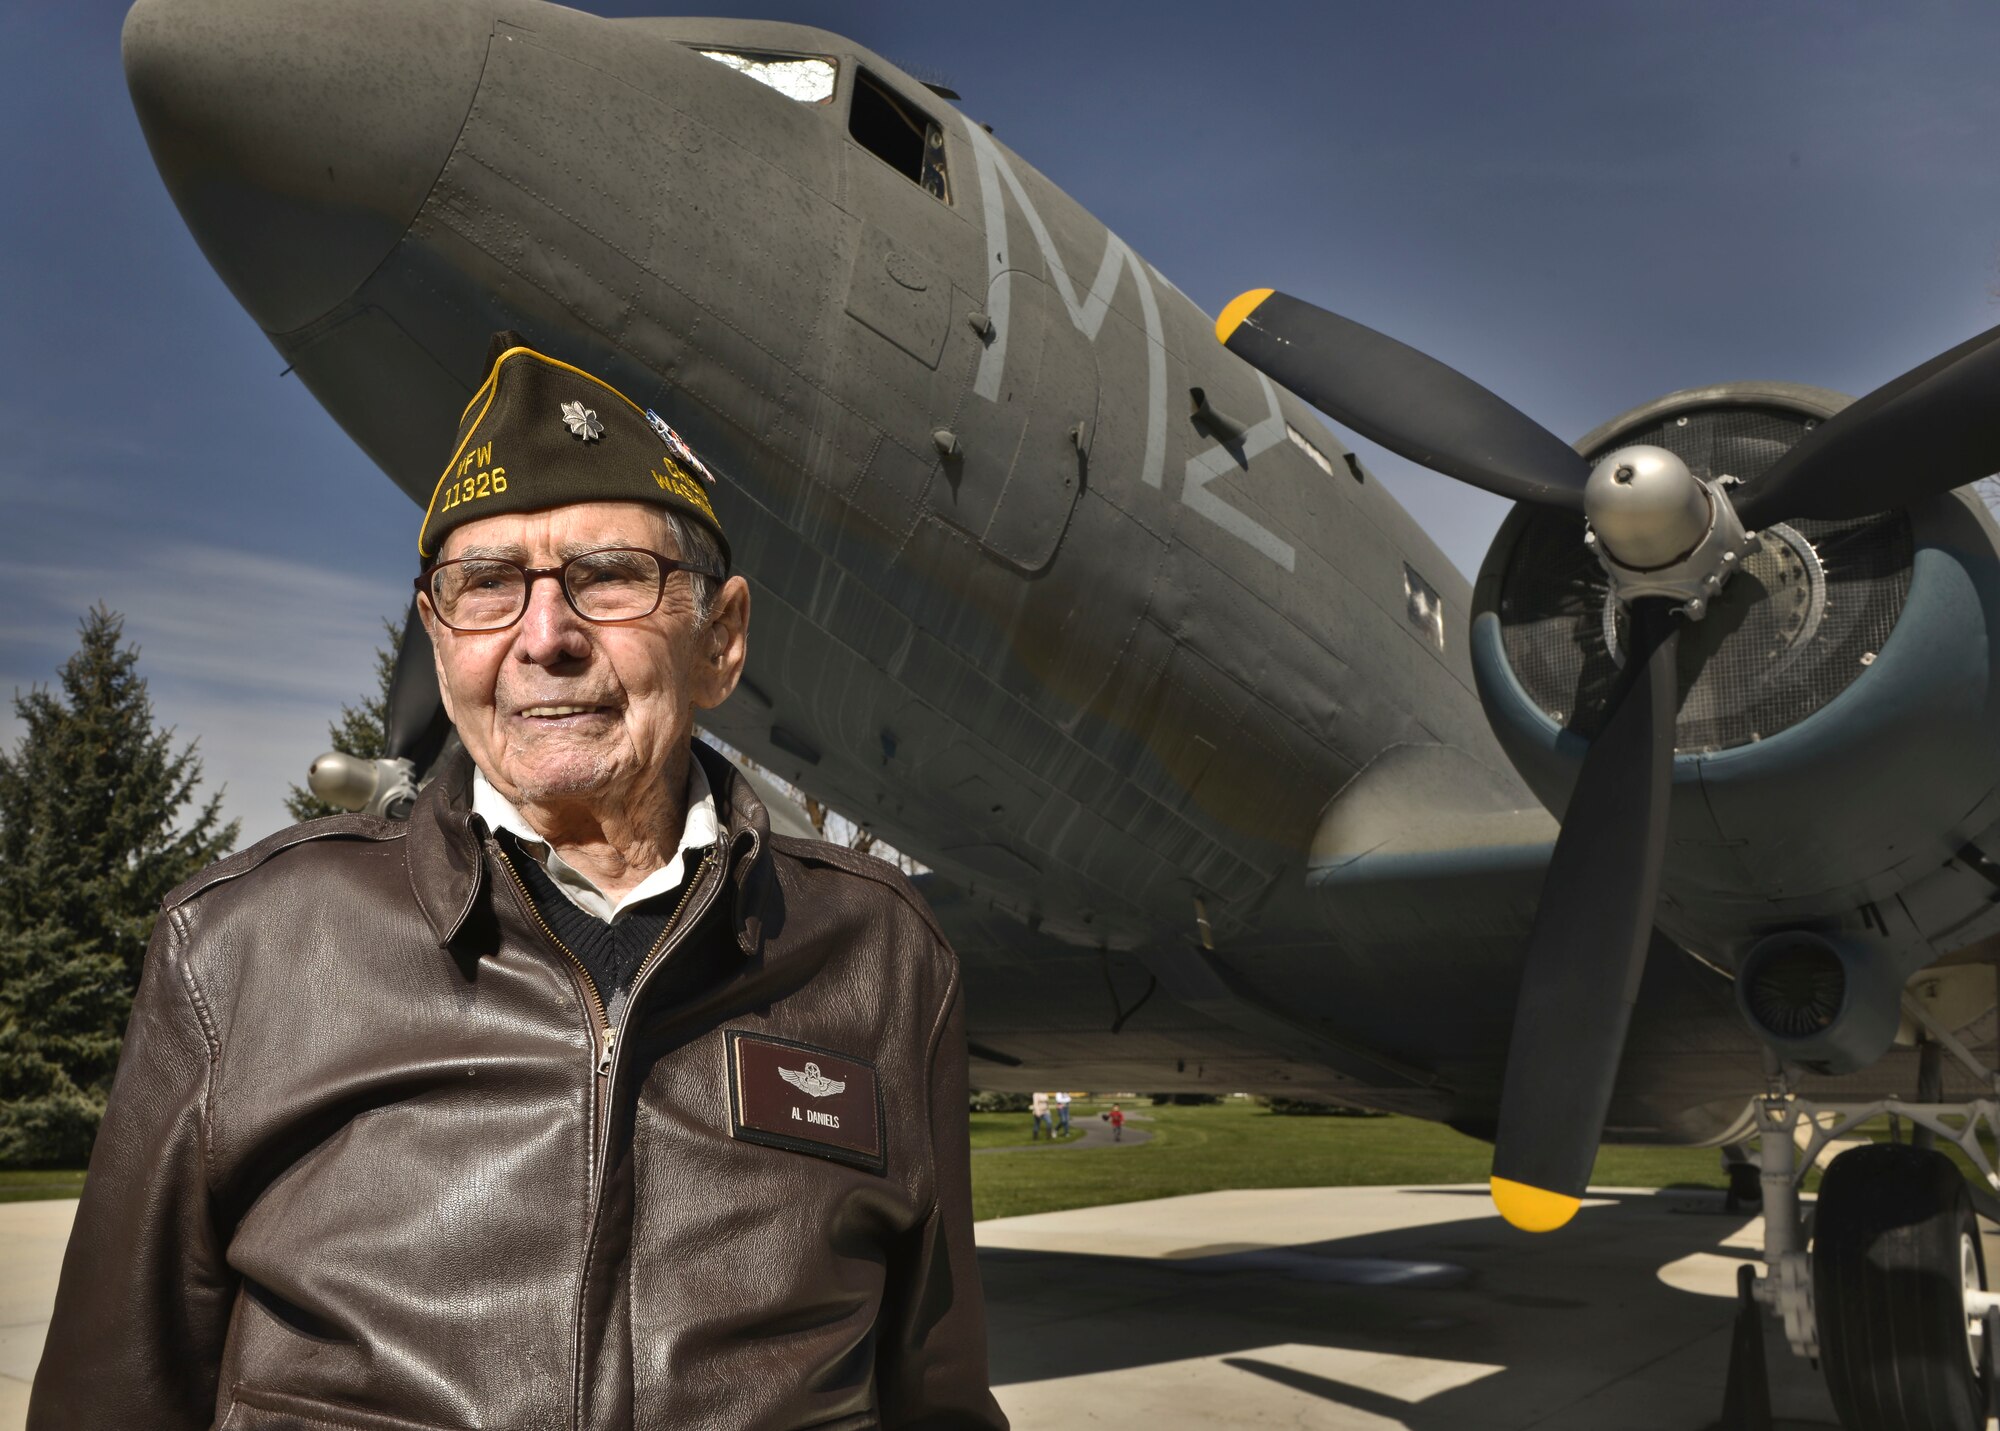 Retired U.S. Air Force Lt. Col. Alston Daniels stands proudly outside of a C-47D Skytrain on static display at Fairchild AFB, Wash. April 7, 2015. Daniels flew the C-47 during World War II and calls it his favorite plane of the 10 he flew throughout his career. (U.S. Air Force photo/Staff Sgt. Alex Montes)